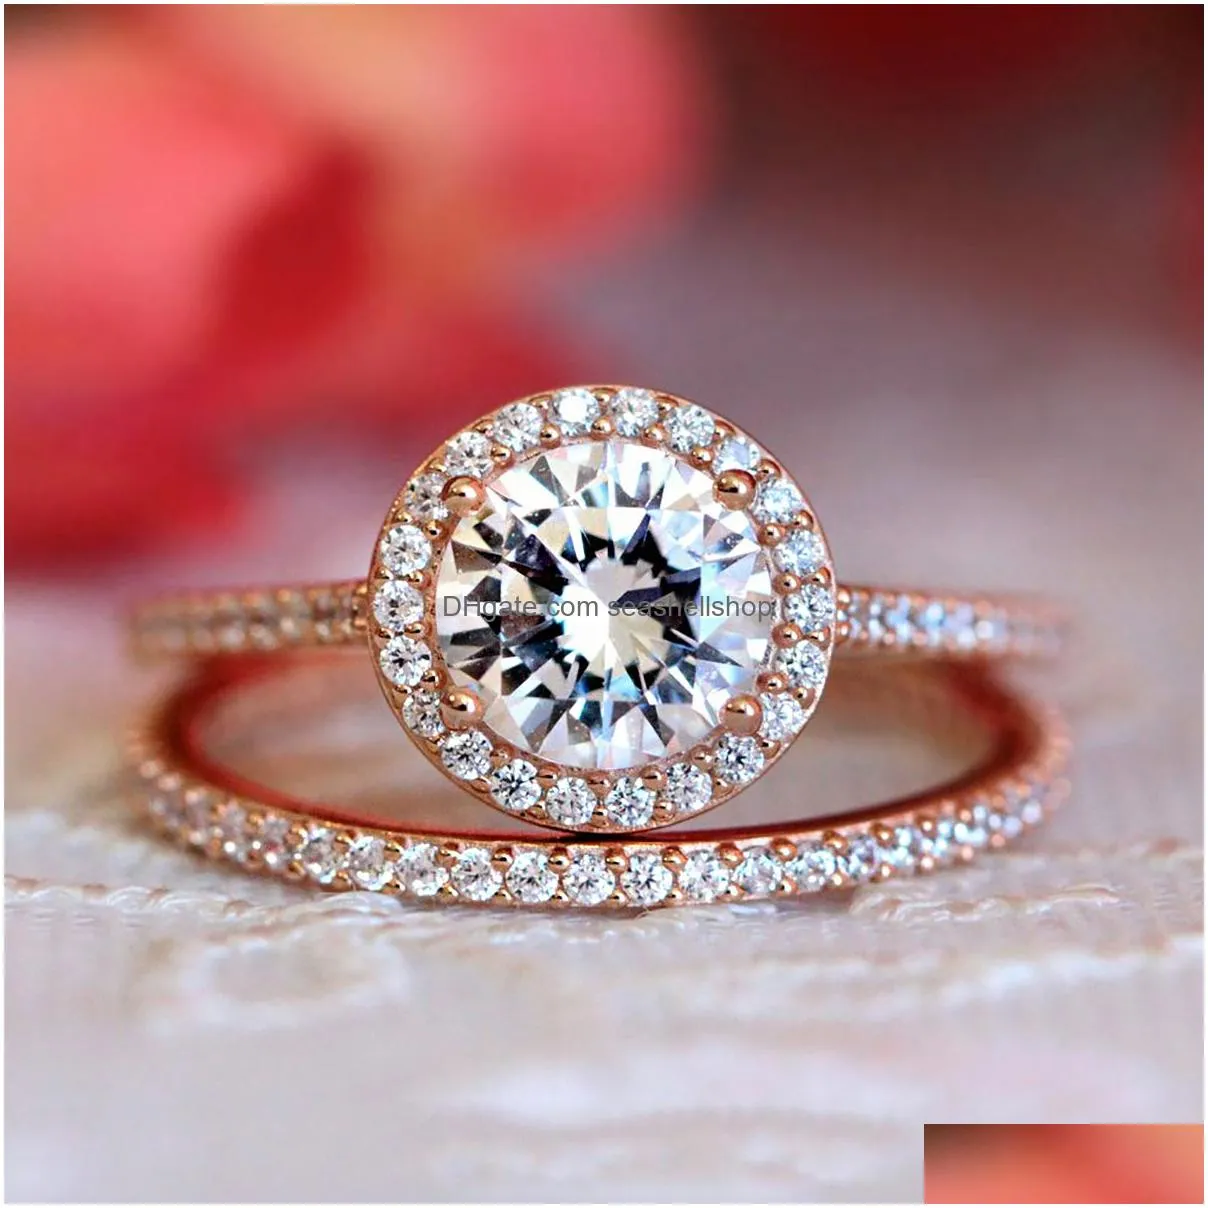 Band Rings Wedding Engagement Rings Set For Women Couple Square Sier Color Cubic Zircon Birde Ring Dazzling Fashion Jewelry Sr531-M Dr Dhkcy